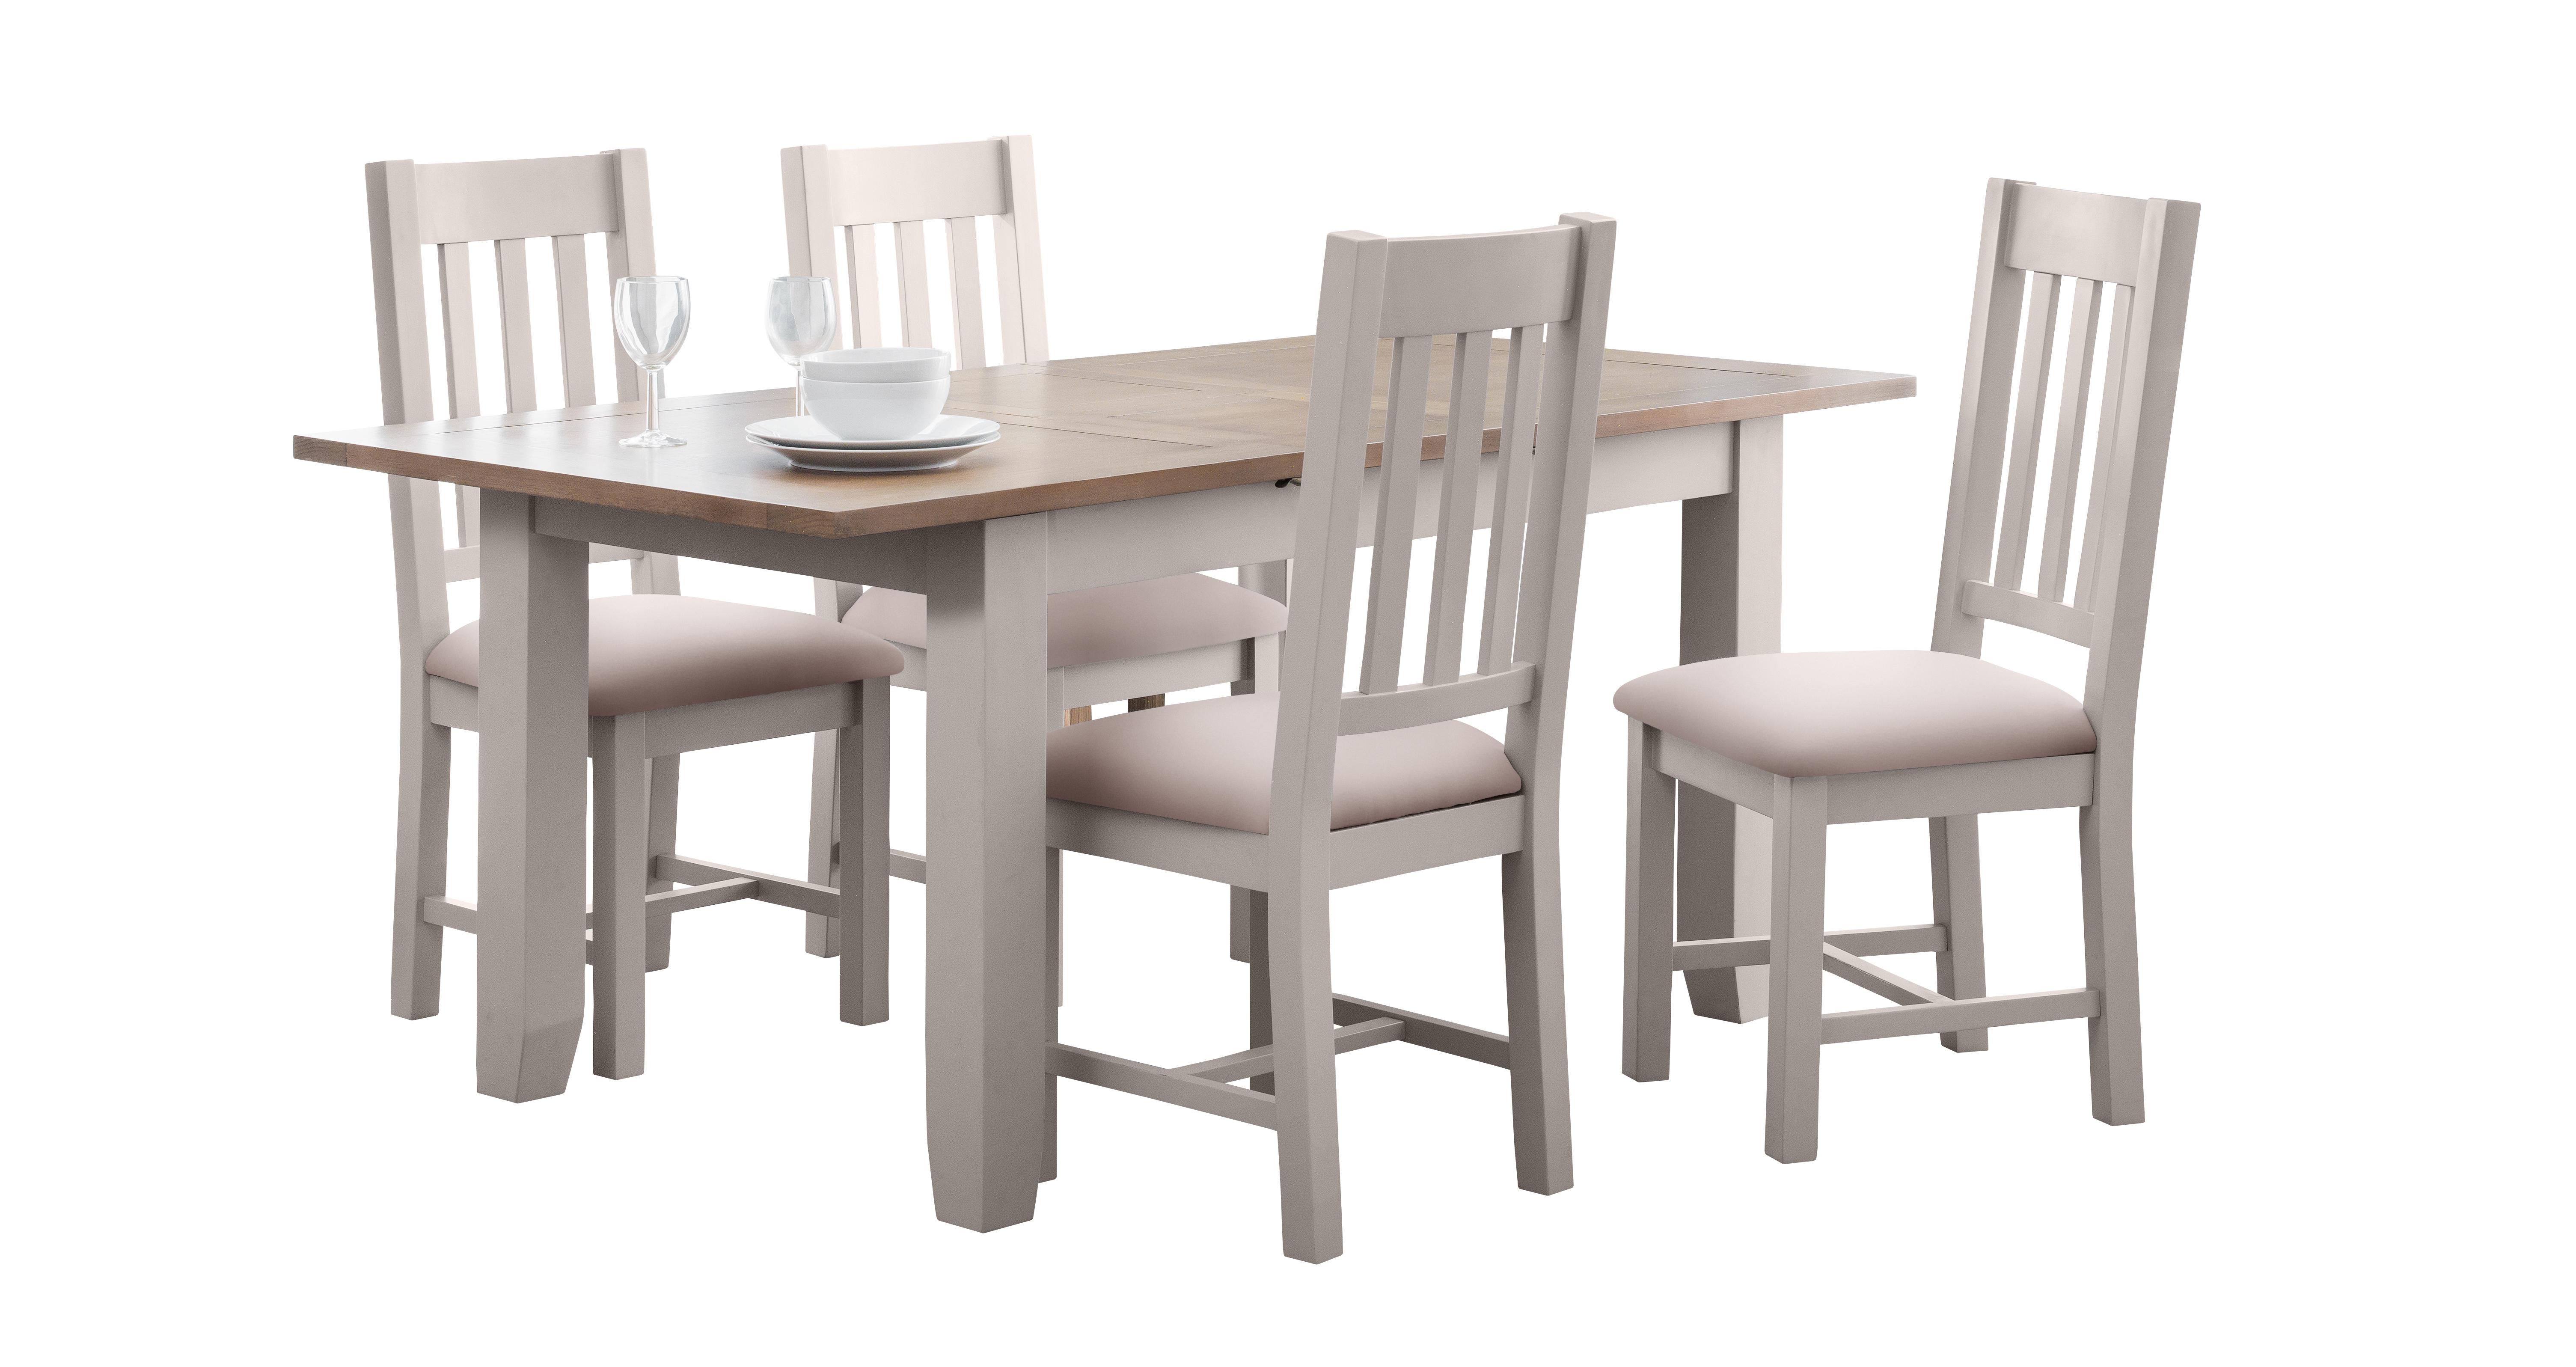 Zennor Dining Medium Extending Table, Dining Table And Chairs Clearance Dfsks